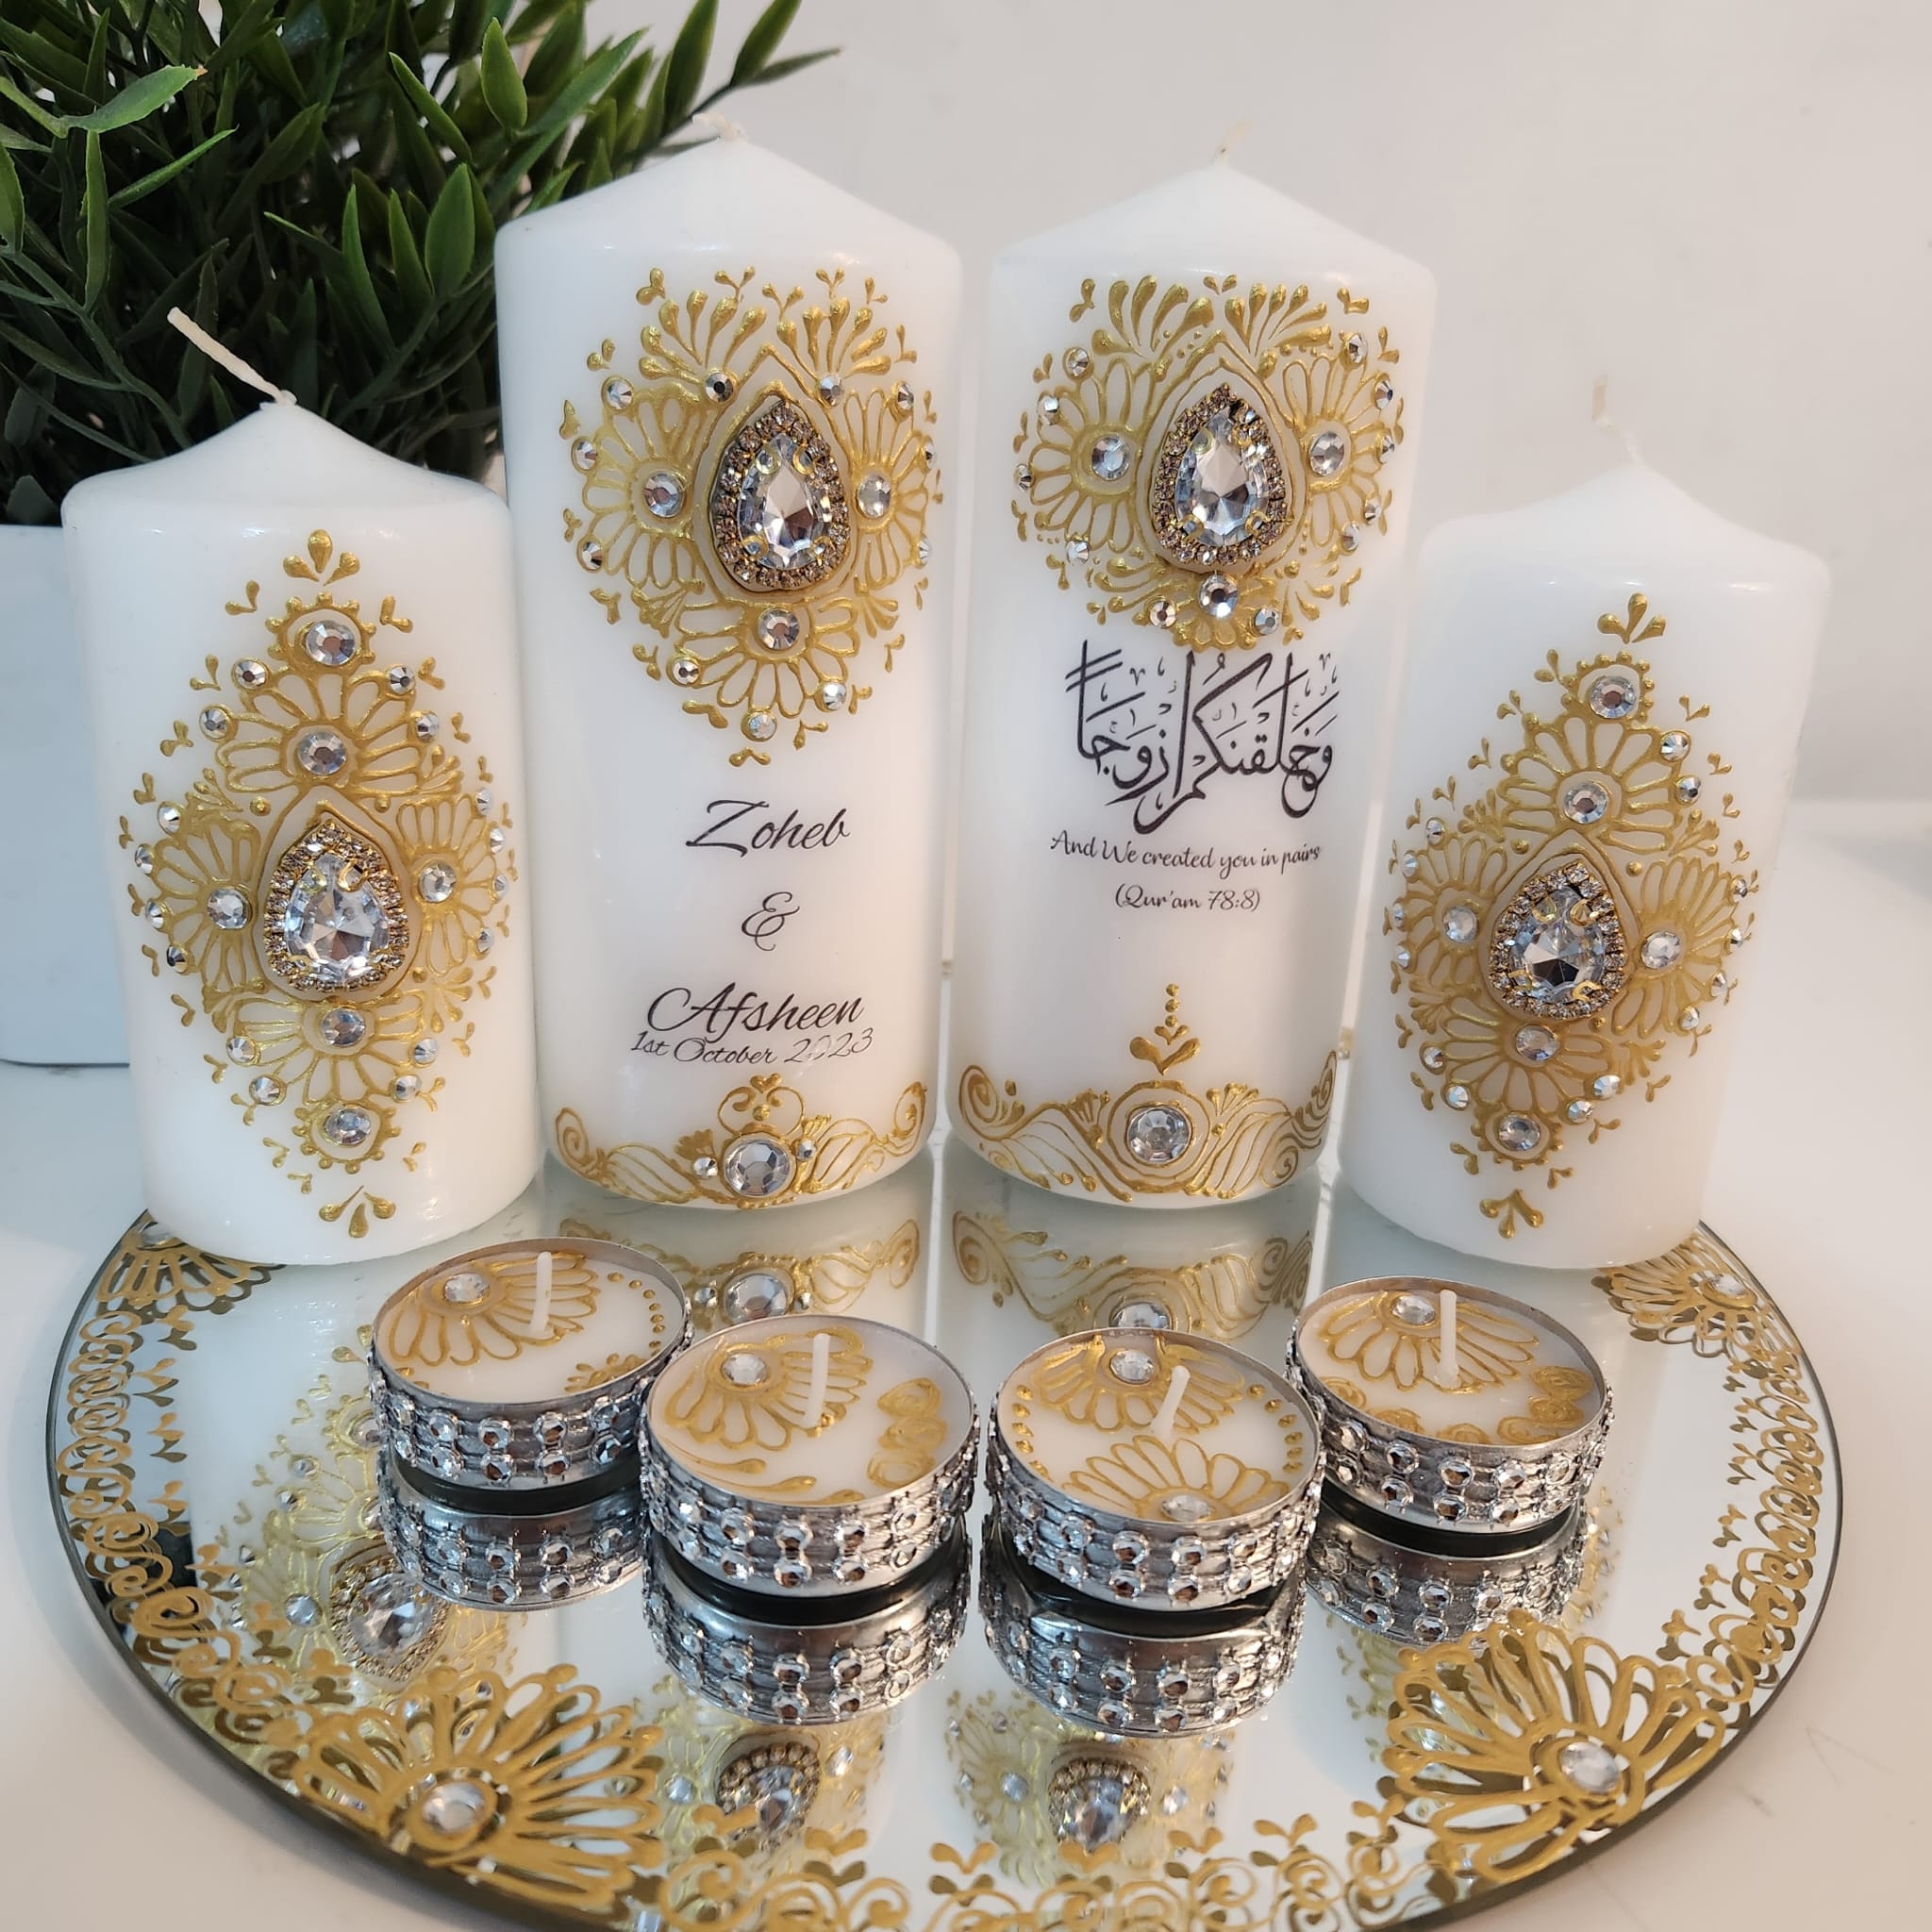 The Prosperity Kit - Personalized Candle, Henna Anointing Oil